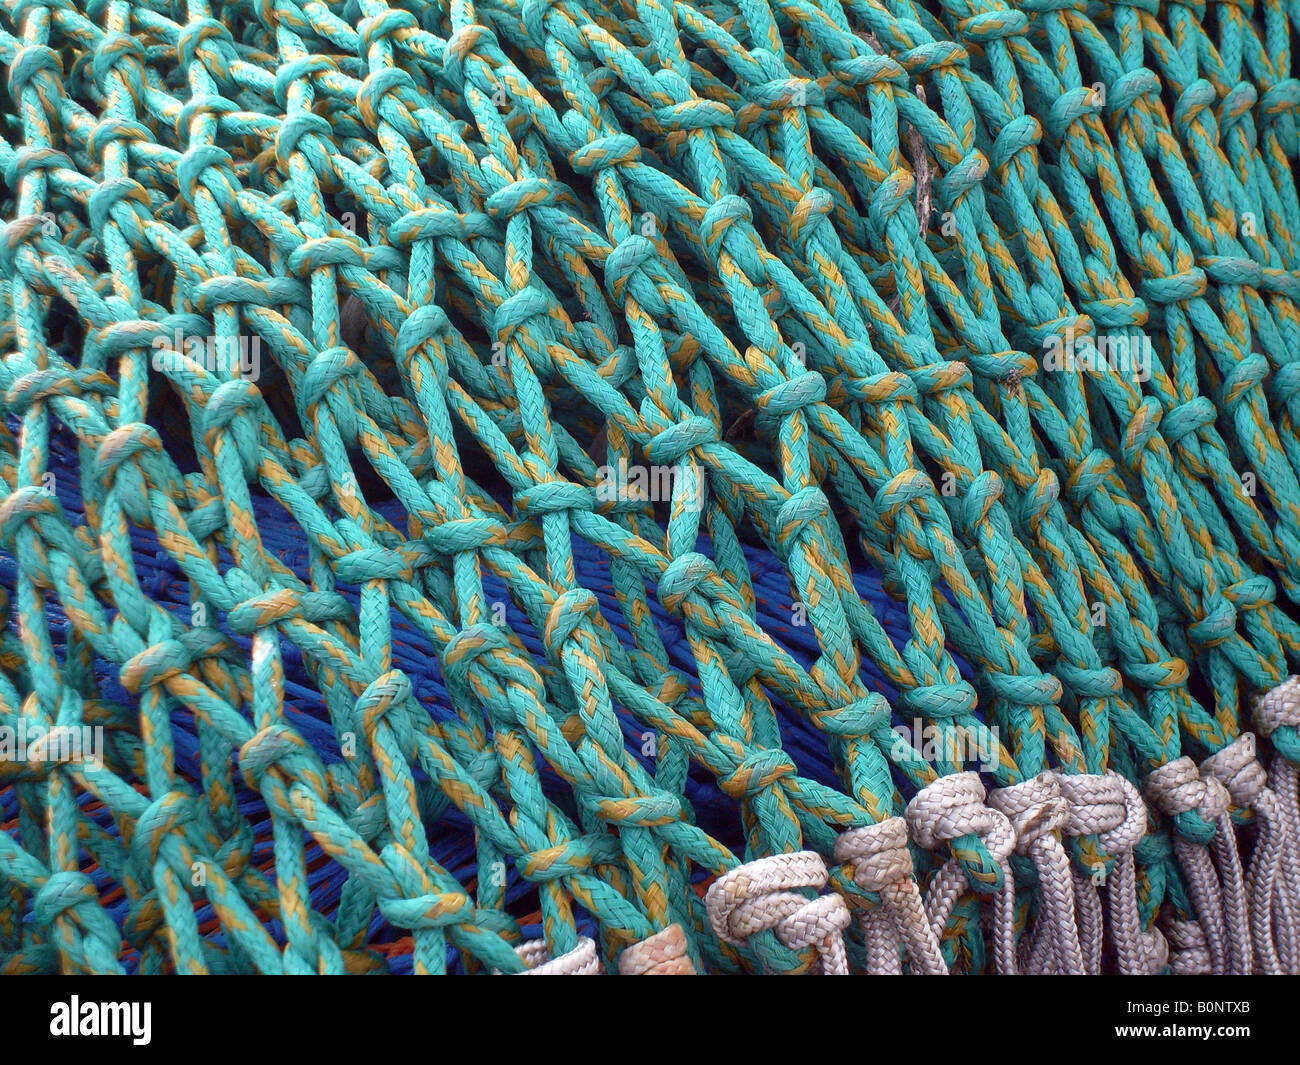 Colorful fishing nets, Scarborough, North Yorkshire, England. Stock Photo